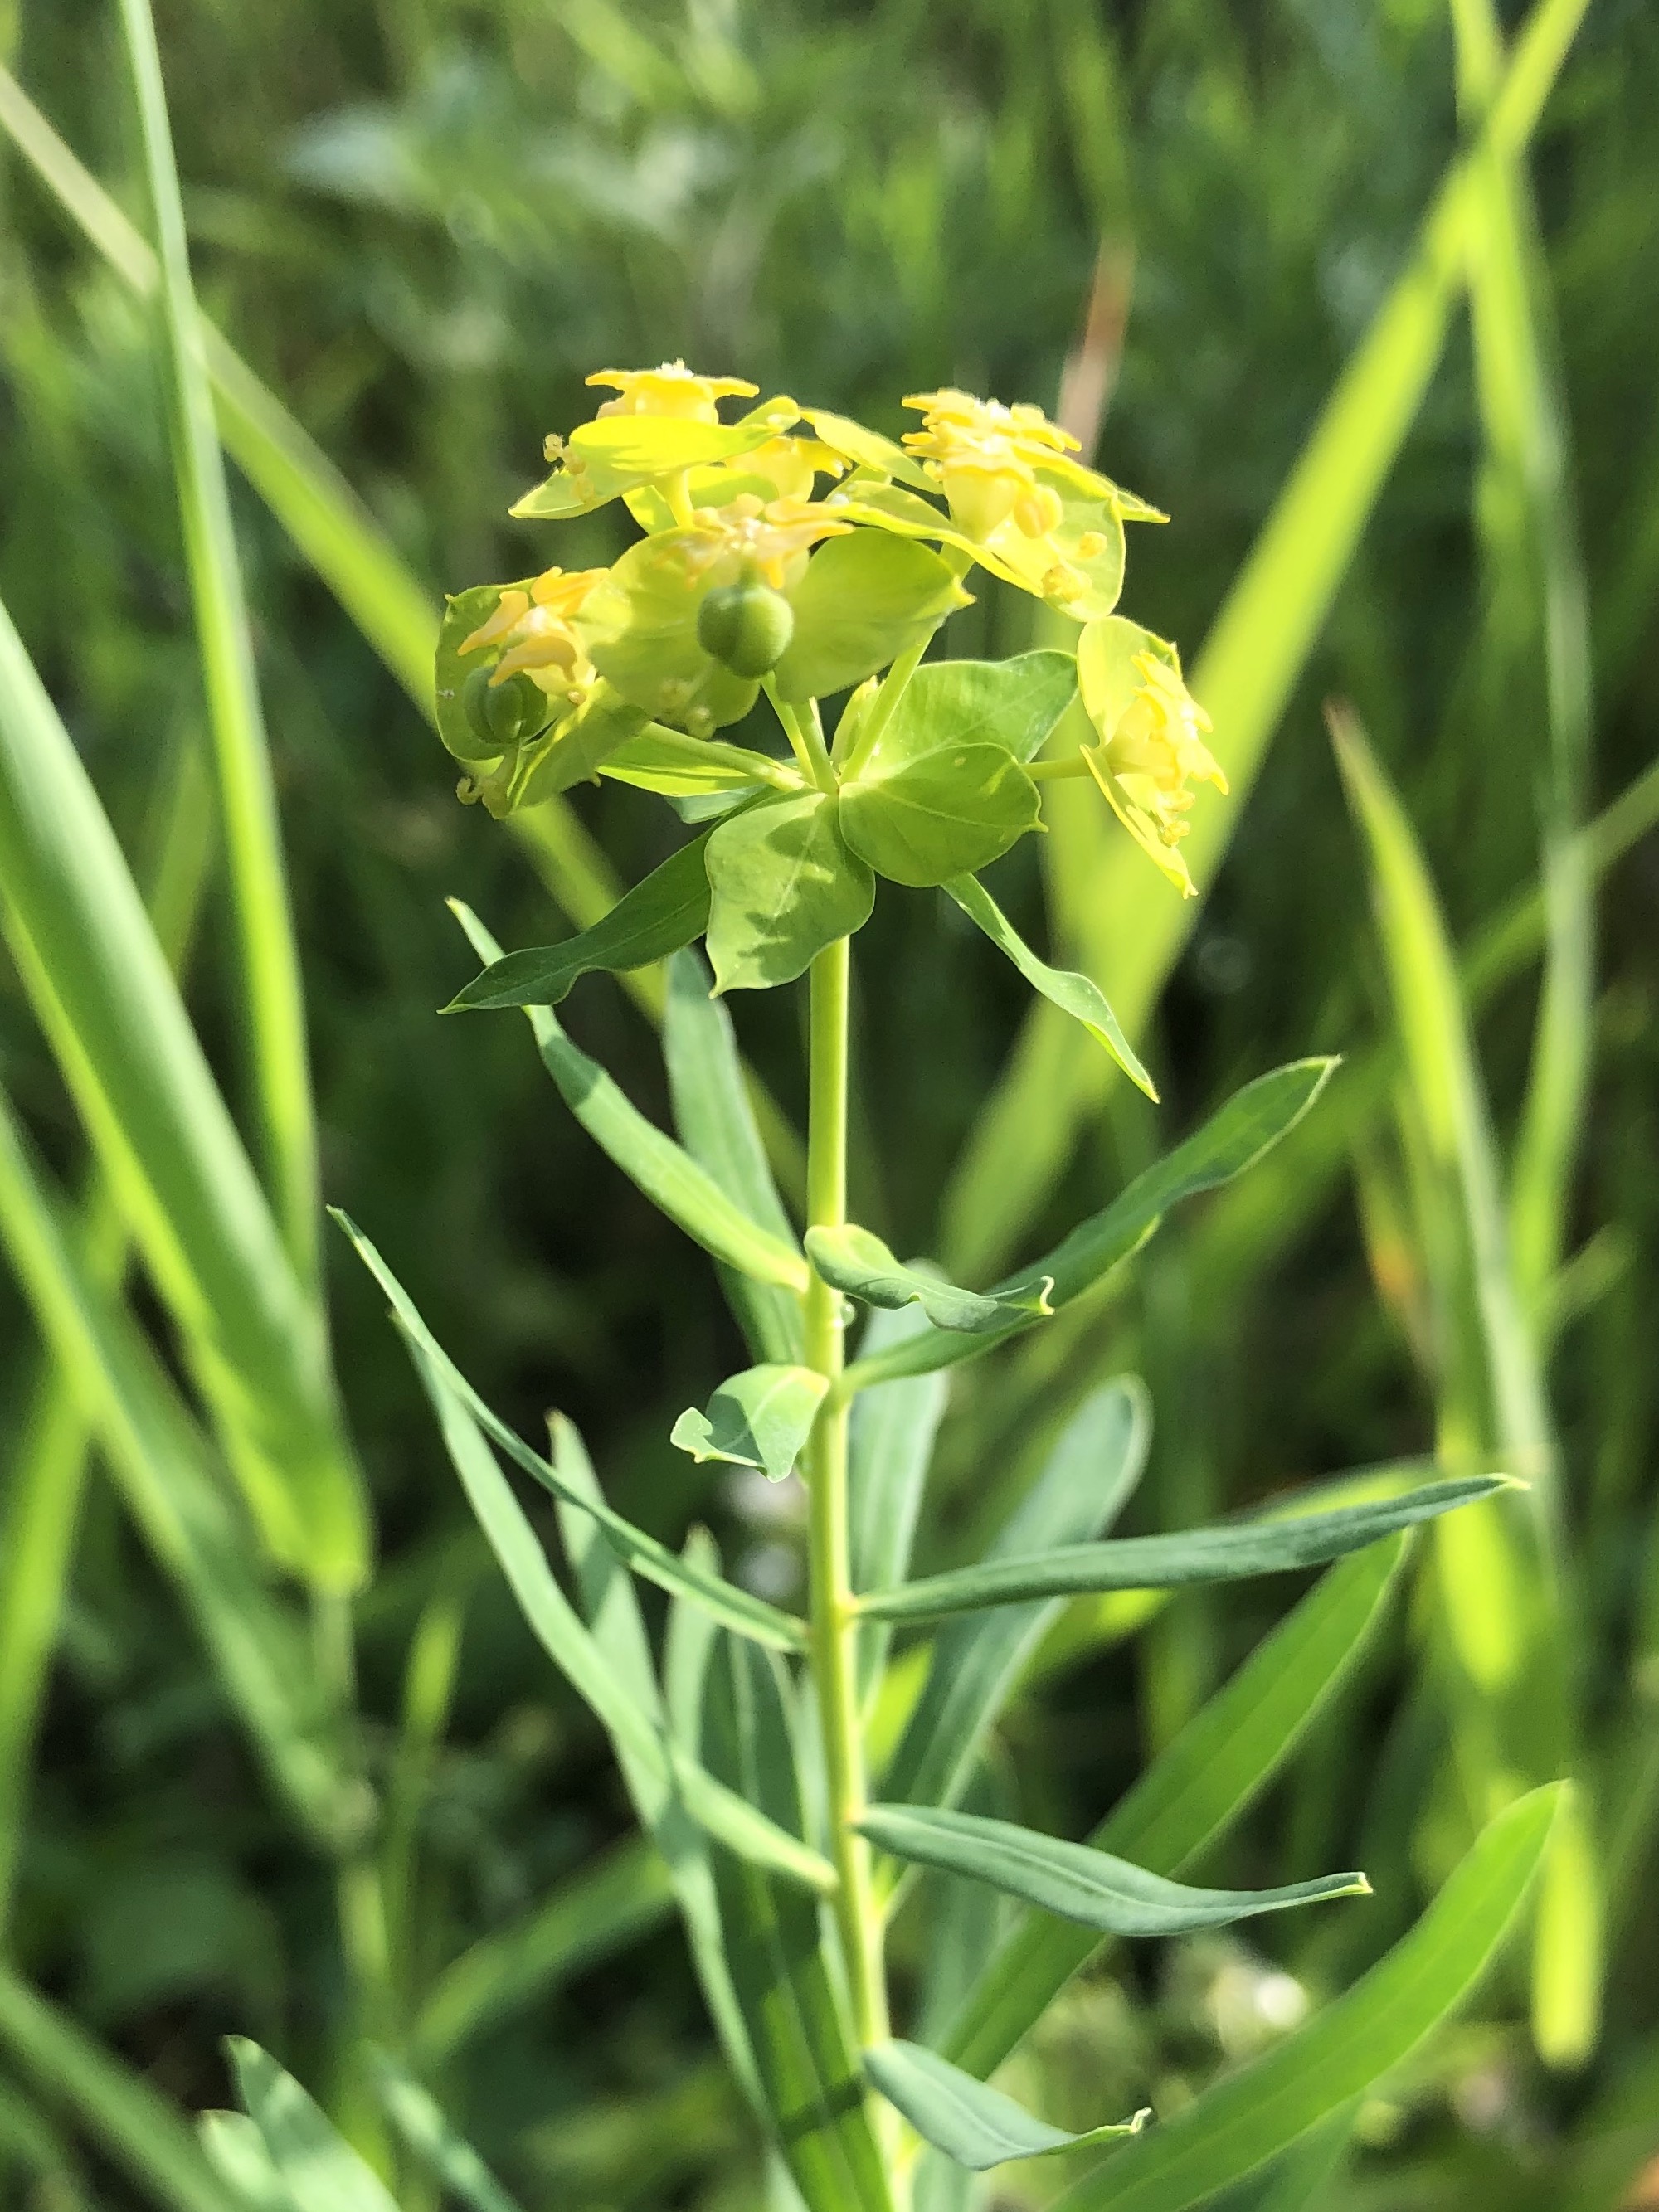 Leafy Spurge around Marion Dunn Pond in Madison, Wisconsin on June 18, 2021.